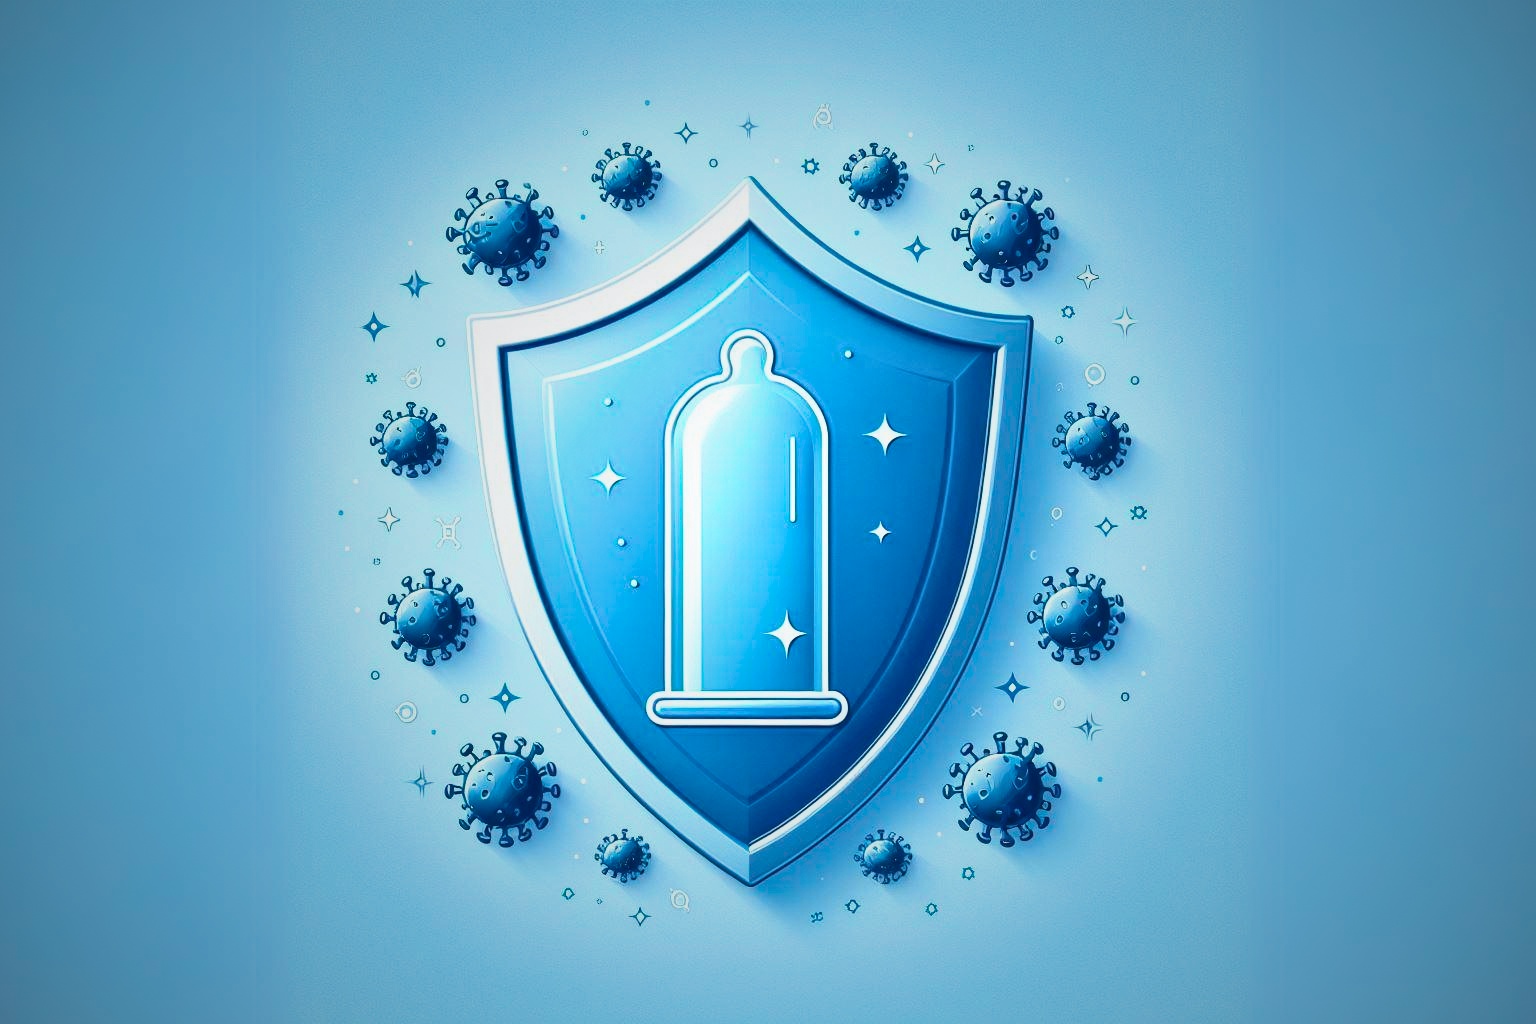 Protective shield with a condom on it, symbolizing the protection condoms offer against diseases and pregnancies